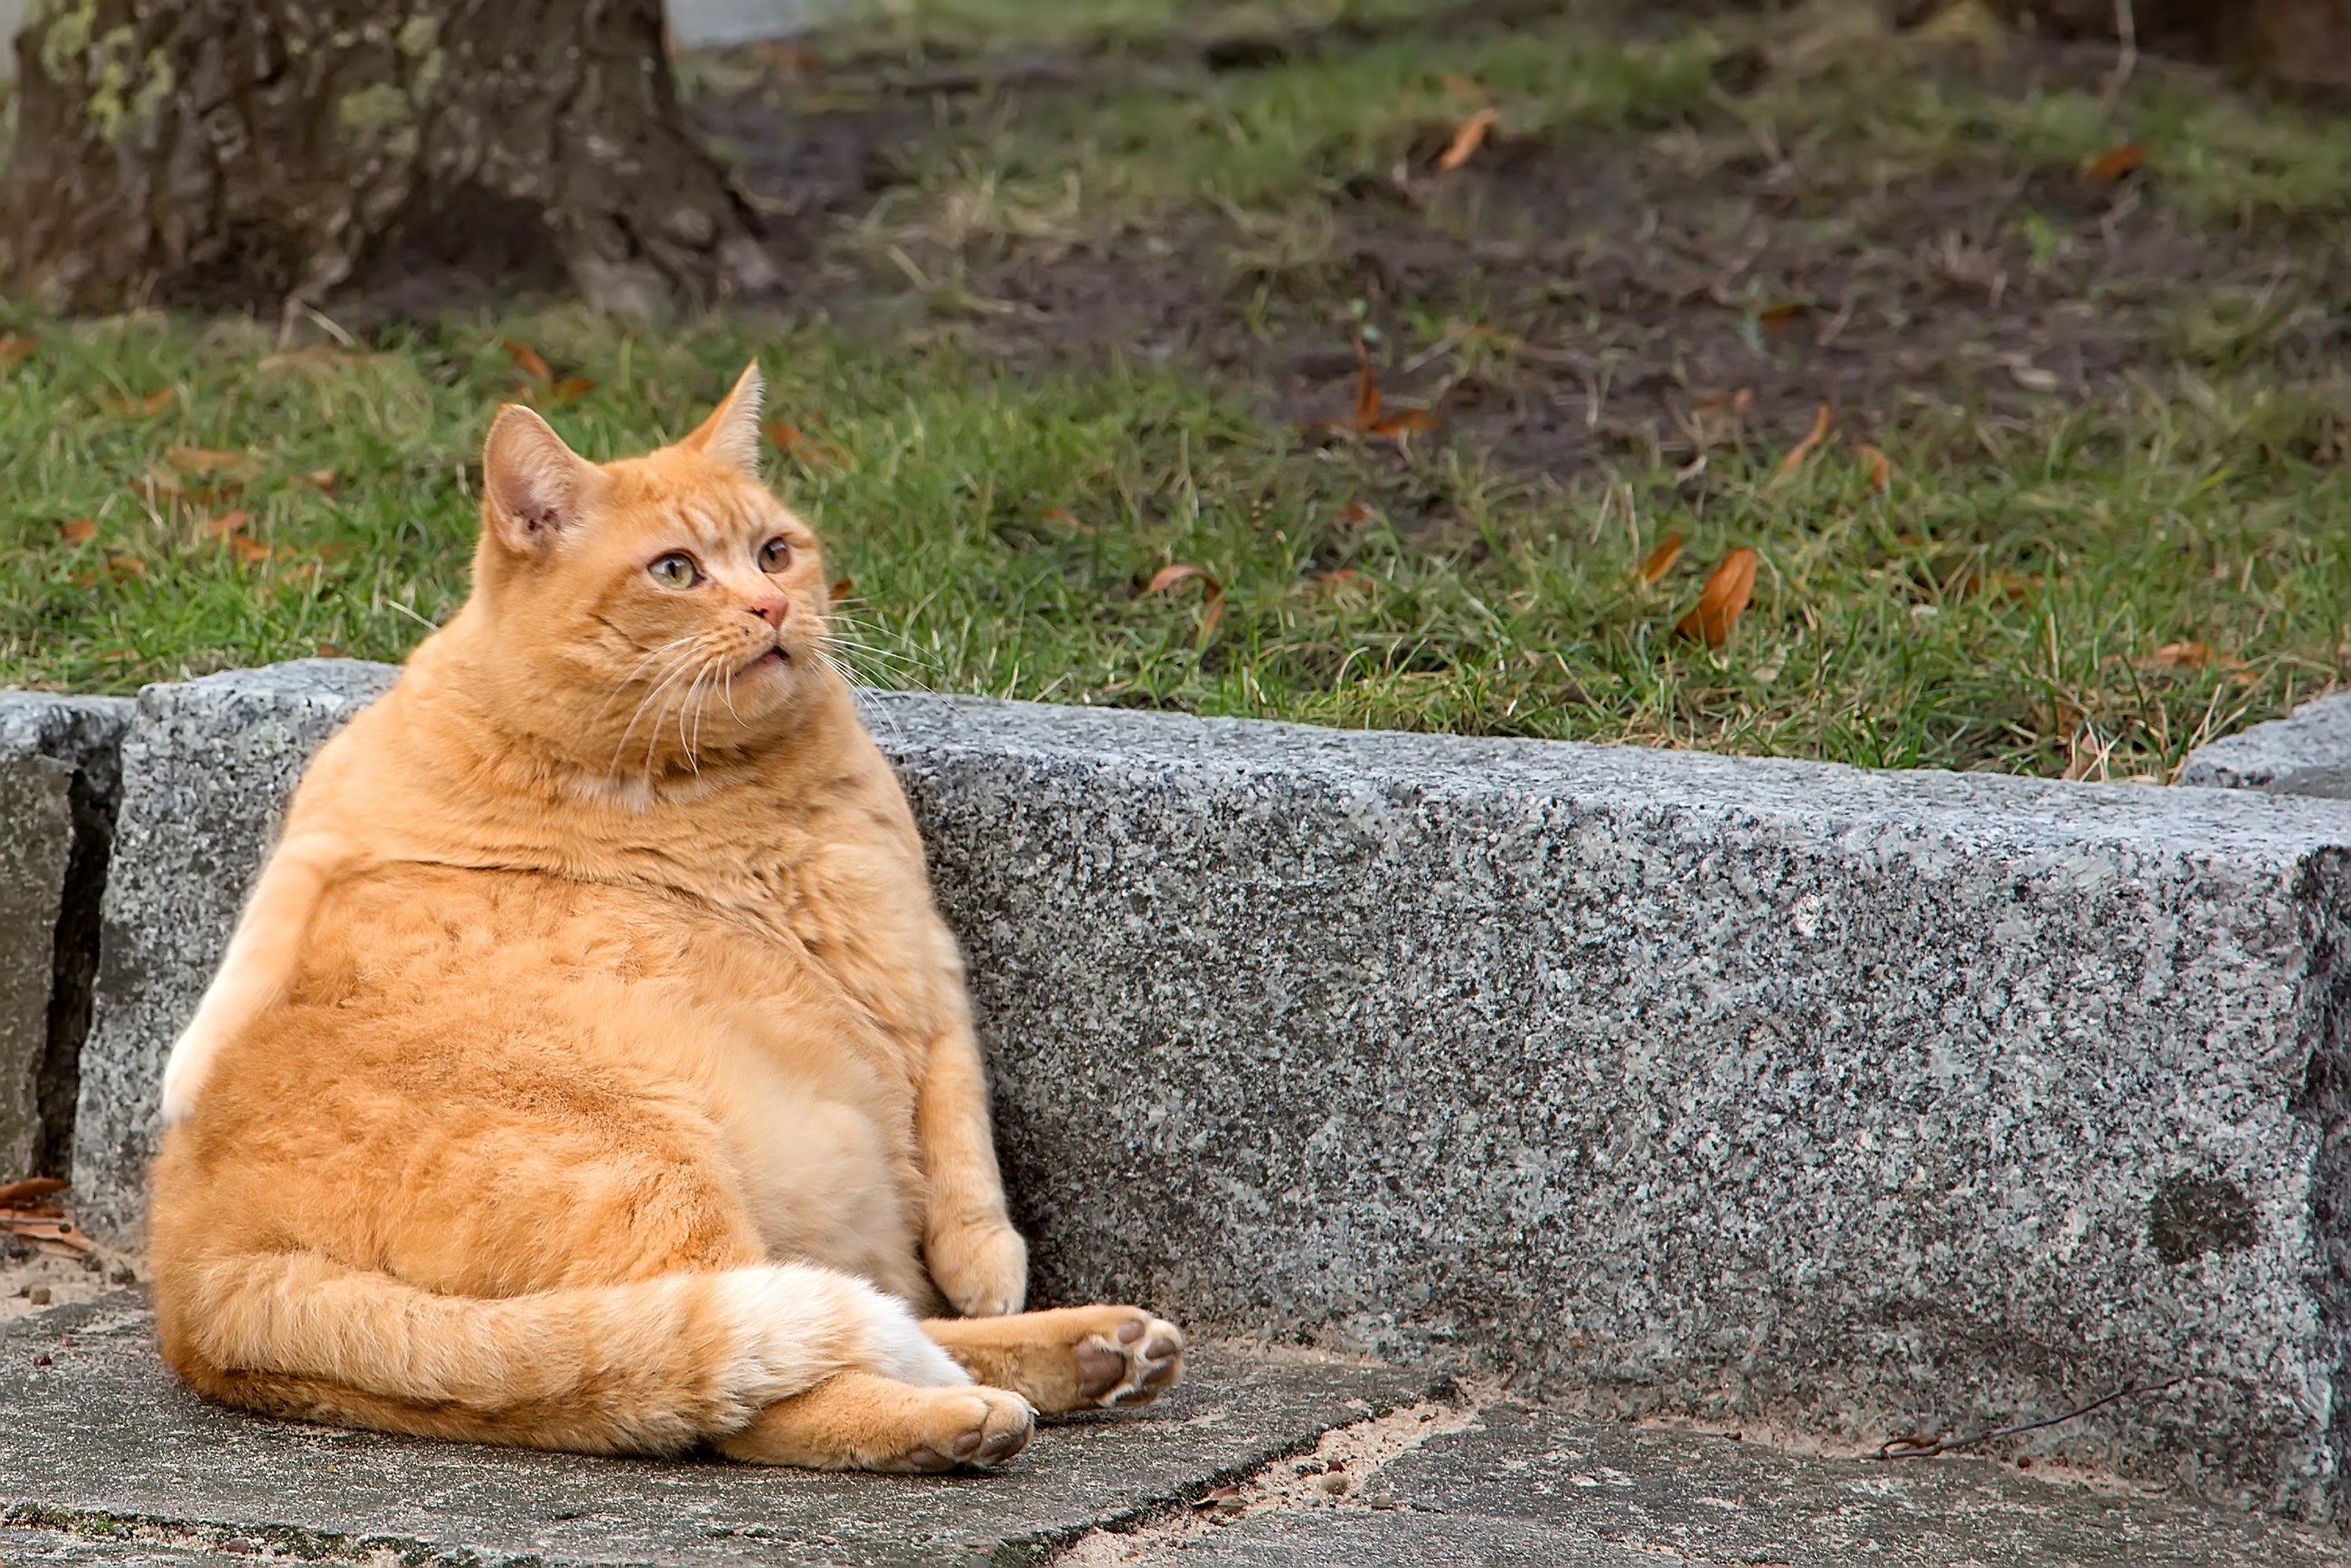 Cat Obesity: Tips for Slimming Down Your Fat Cat